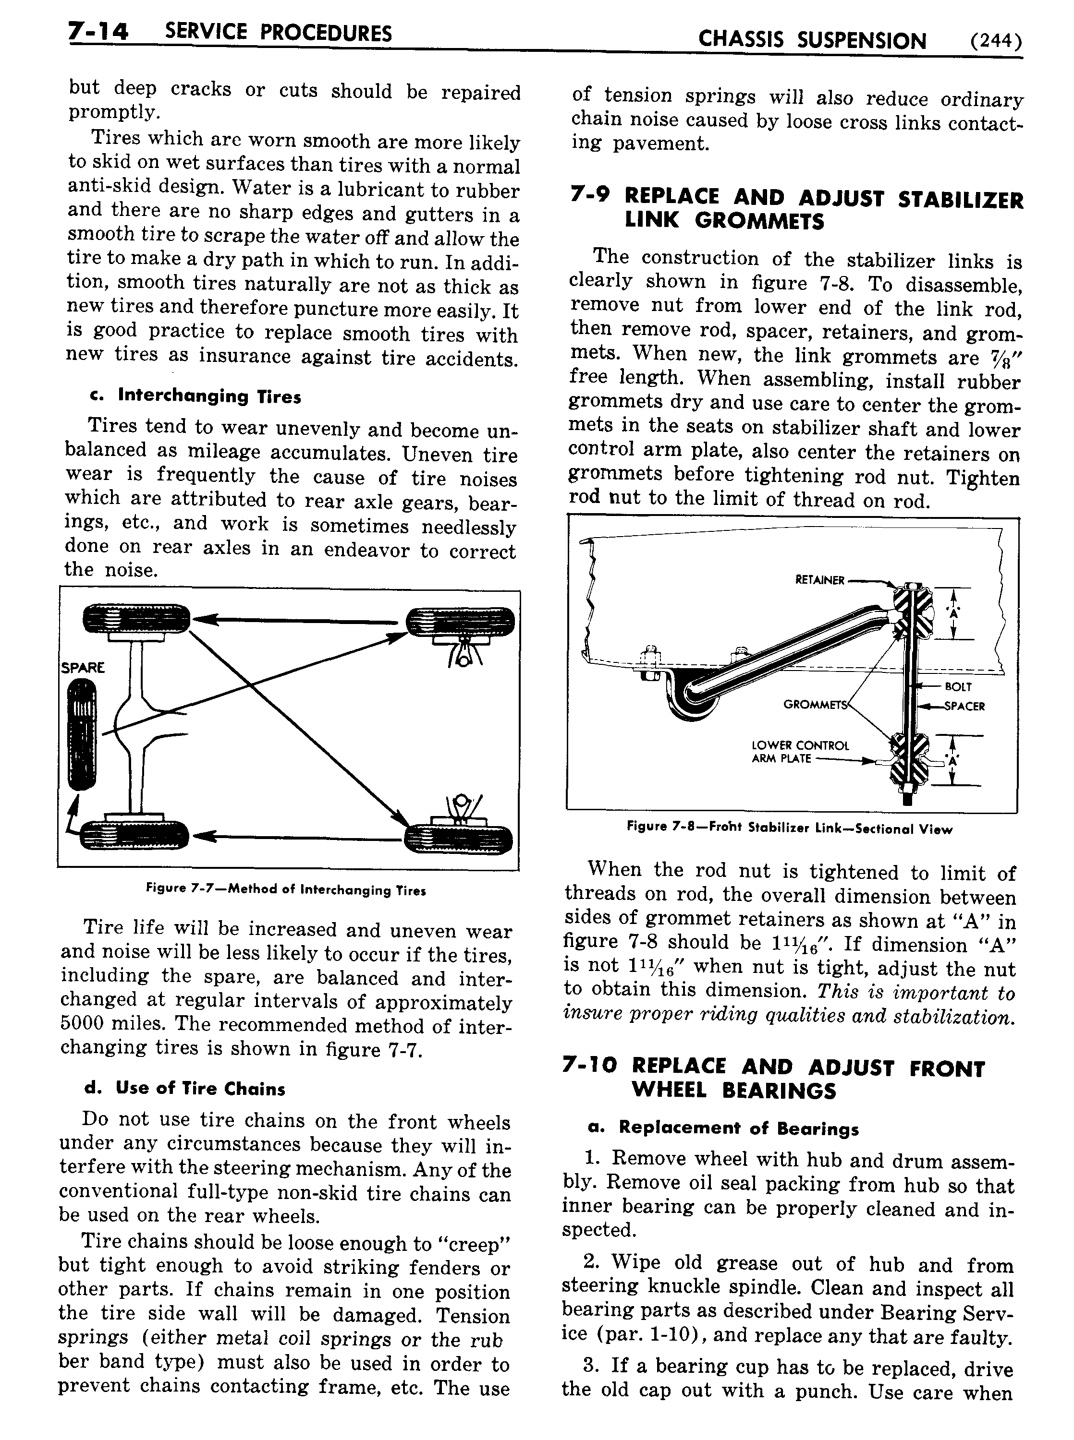 n_08 1954 Buick Shop Manual - Chassis Suspension-014-014.jpg